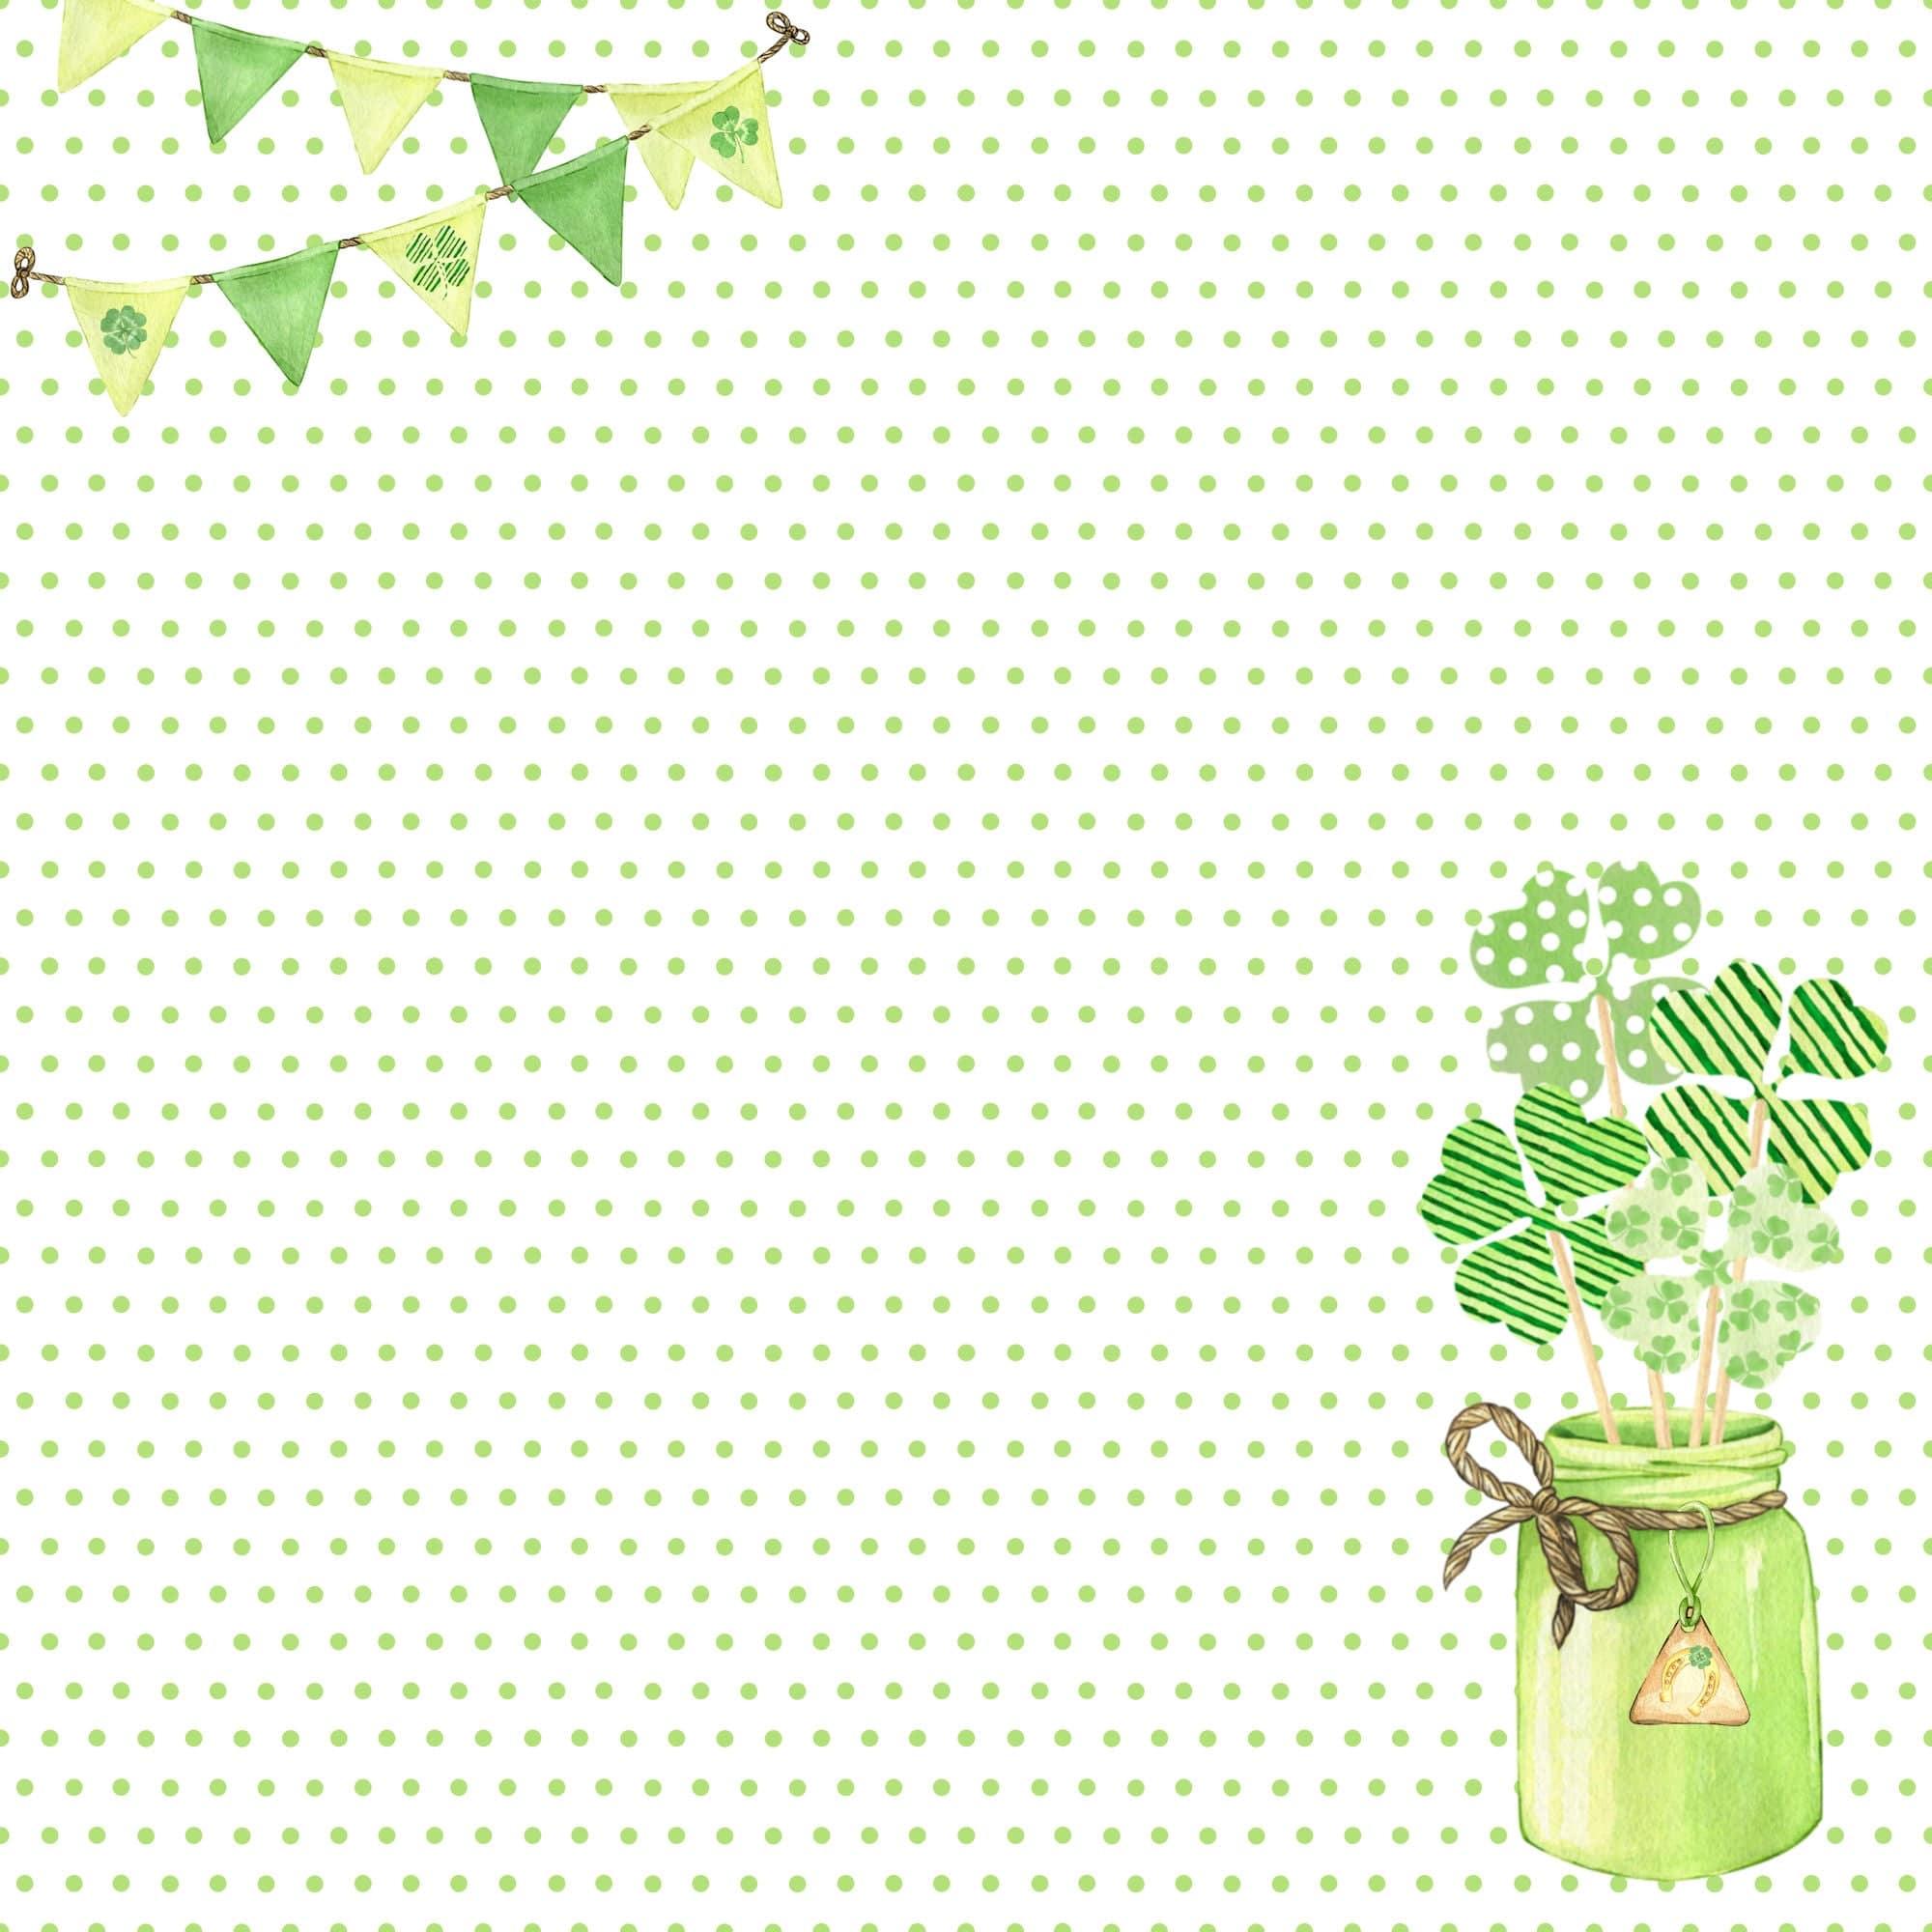 Lucky Leprechauns Collection Clovers 12 x 12 Double-Sided Scrapbook Paper by SSC Designs - Scrapbook Supply Companies